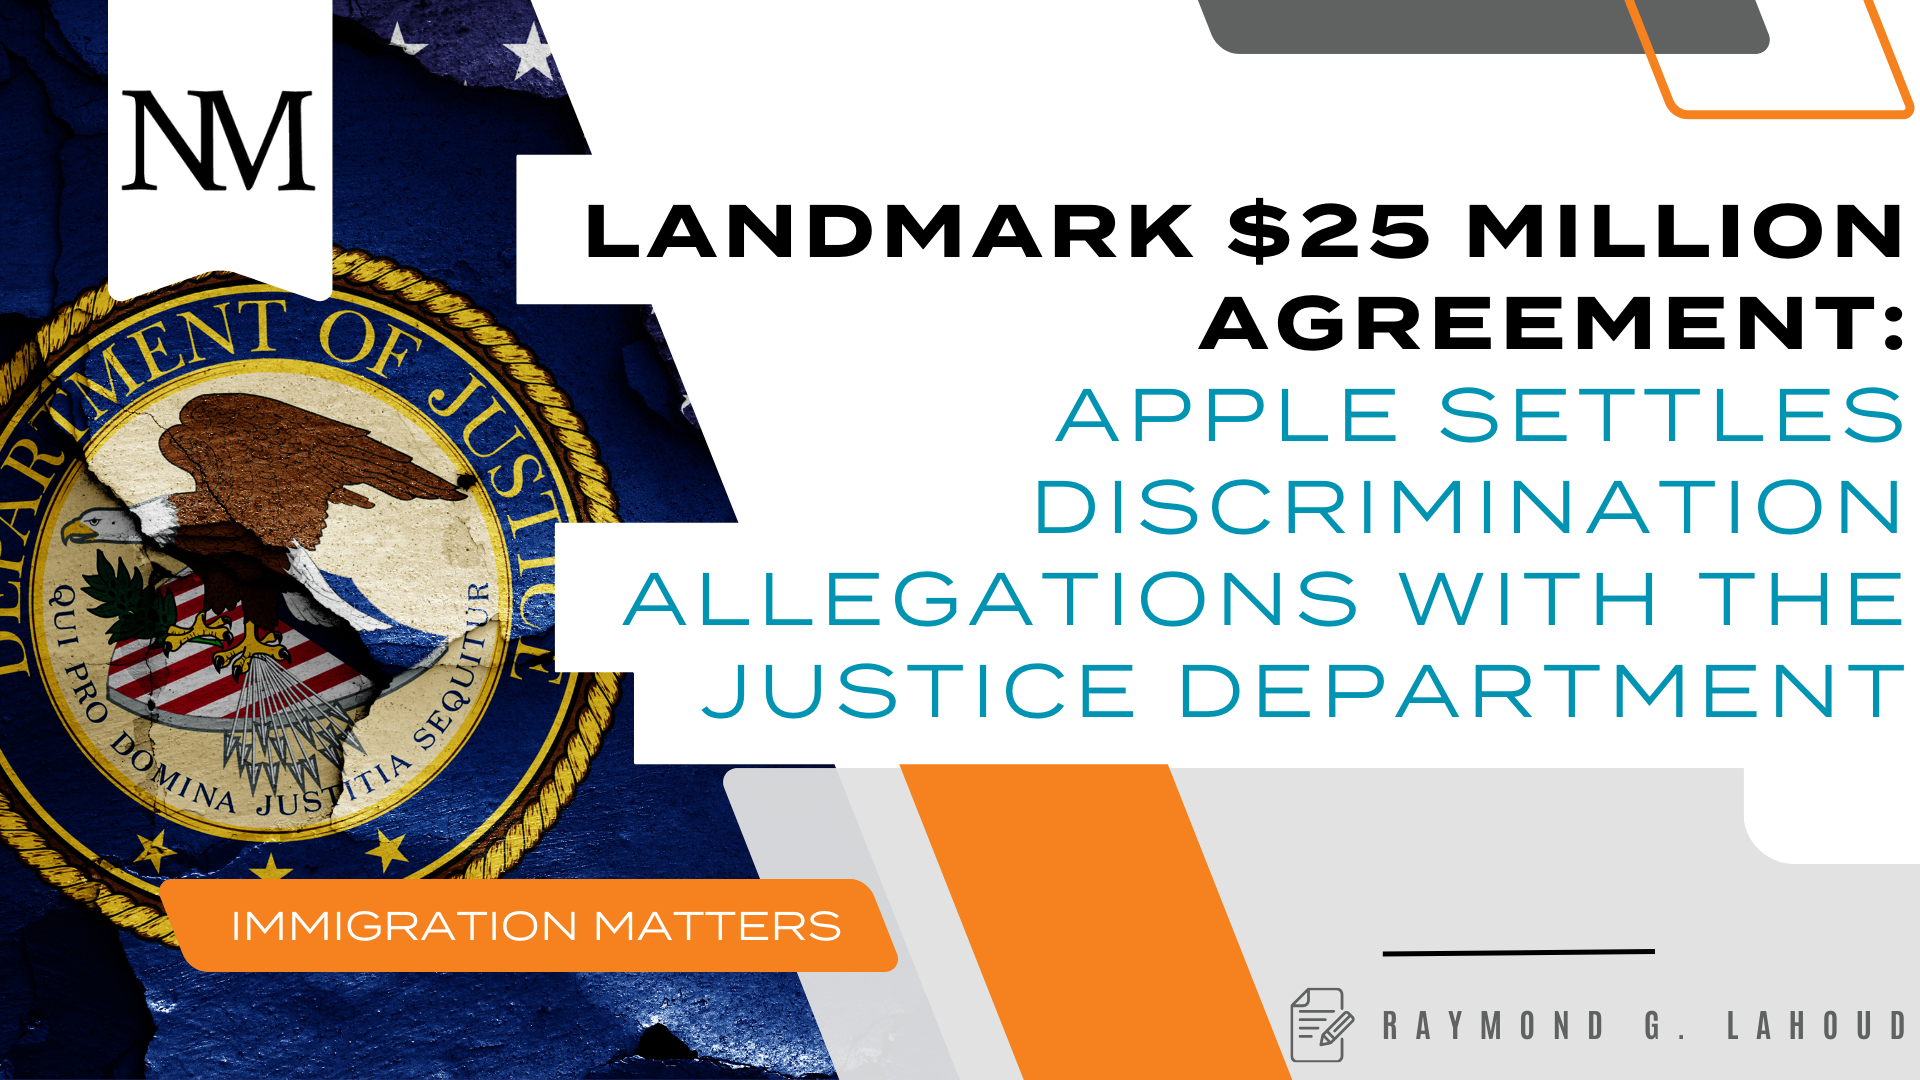 Landmark $25 Million Agreement: Apple Settles Discrimination Allegations with the Justice Department